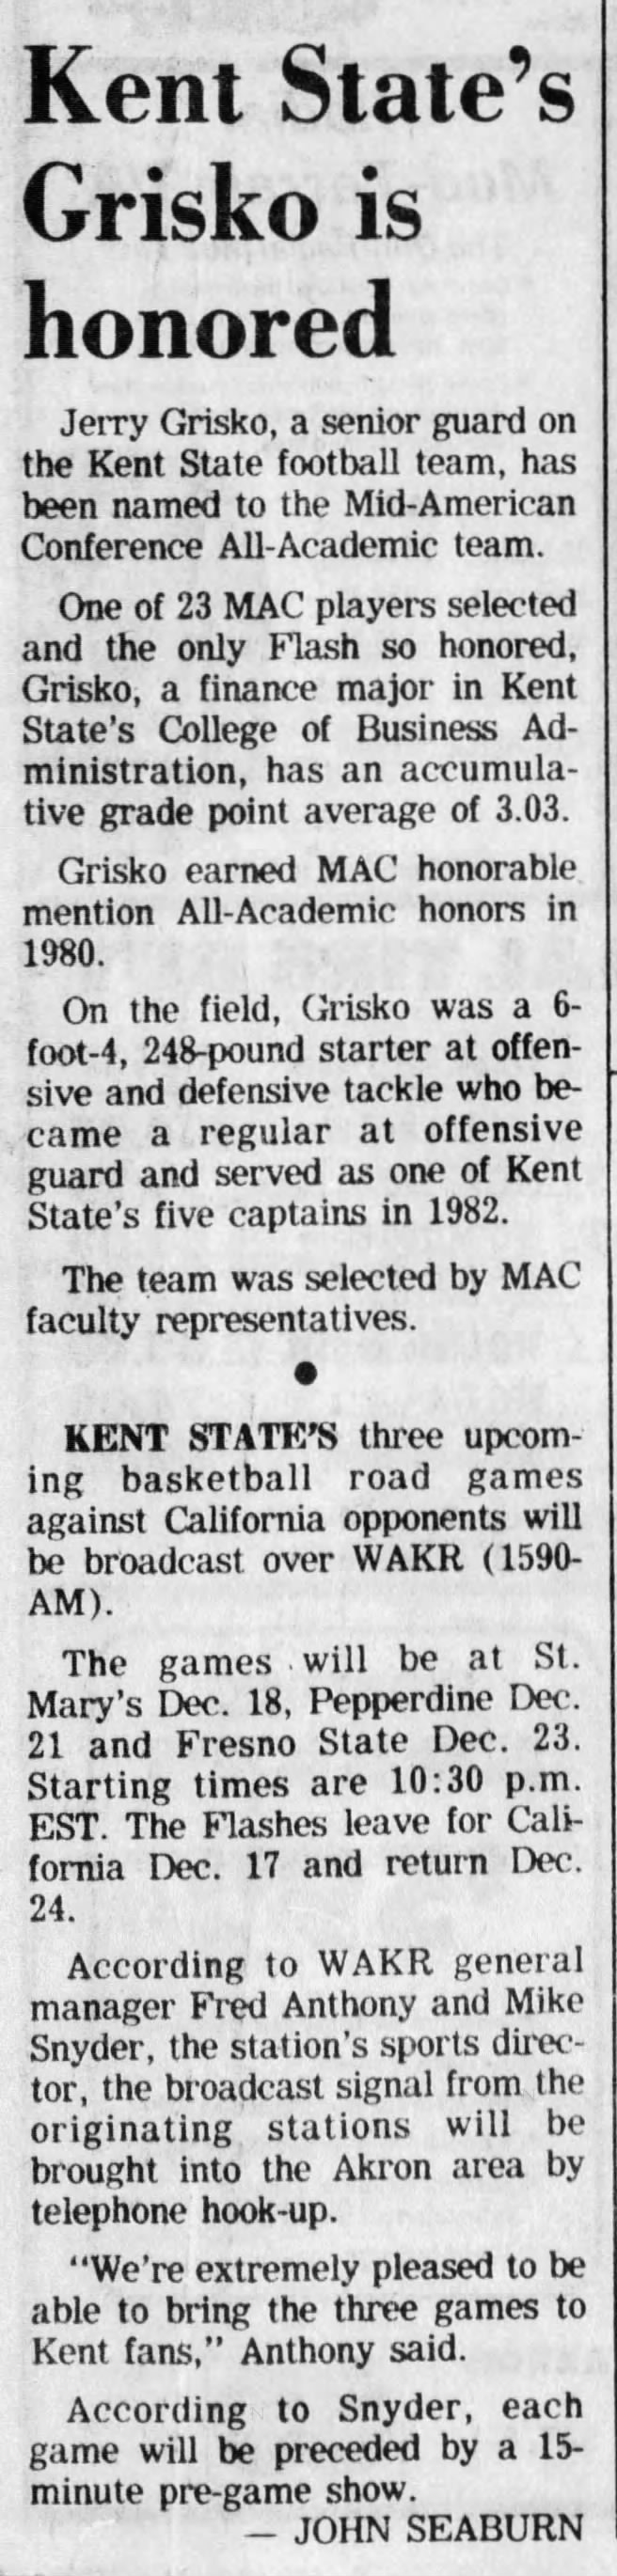 Kent State's Grisko is honored